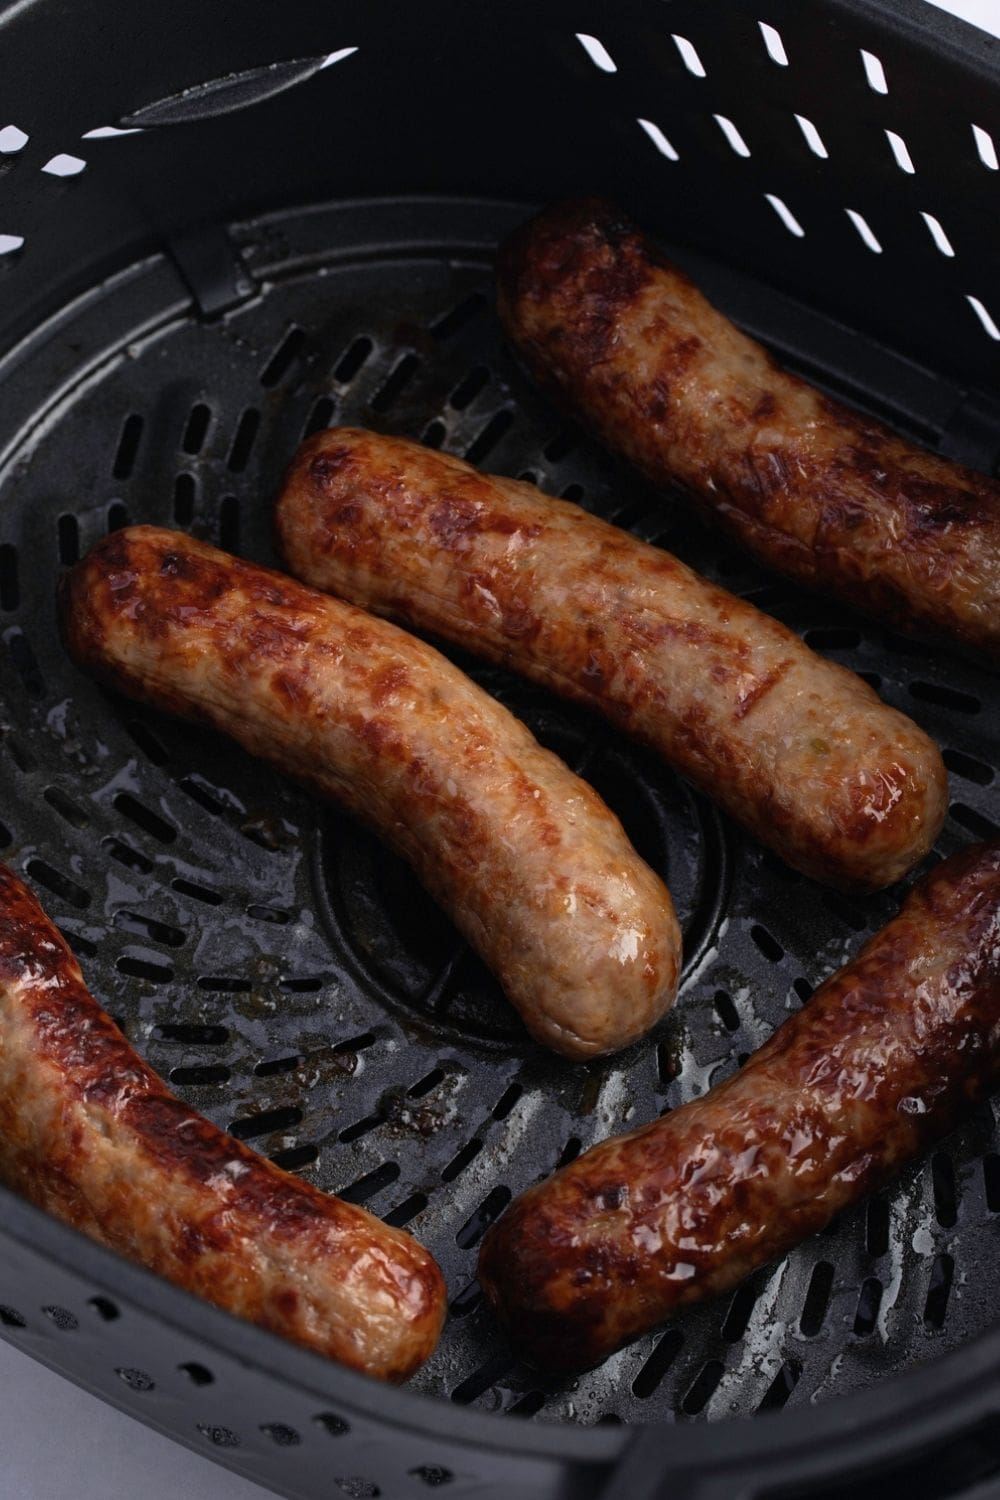 https://insanelygoodrecipes.com/wp-content/uploads/2021/07/Air-Fryer-Sausage-Perfectly-Cooked-for-Breakfast.jpg